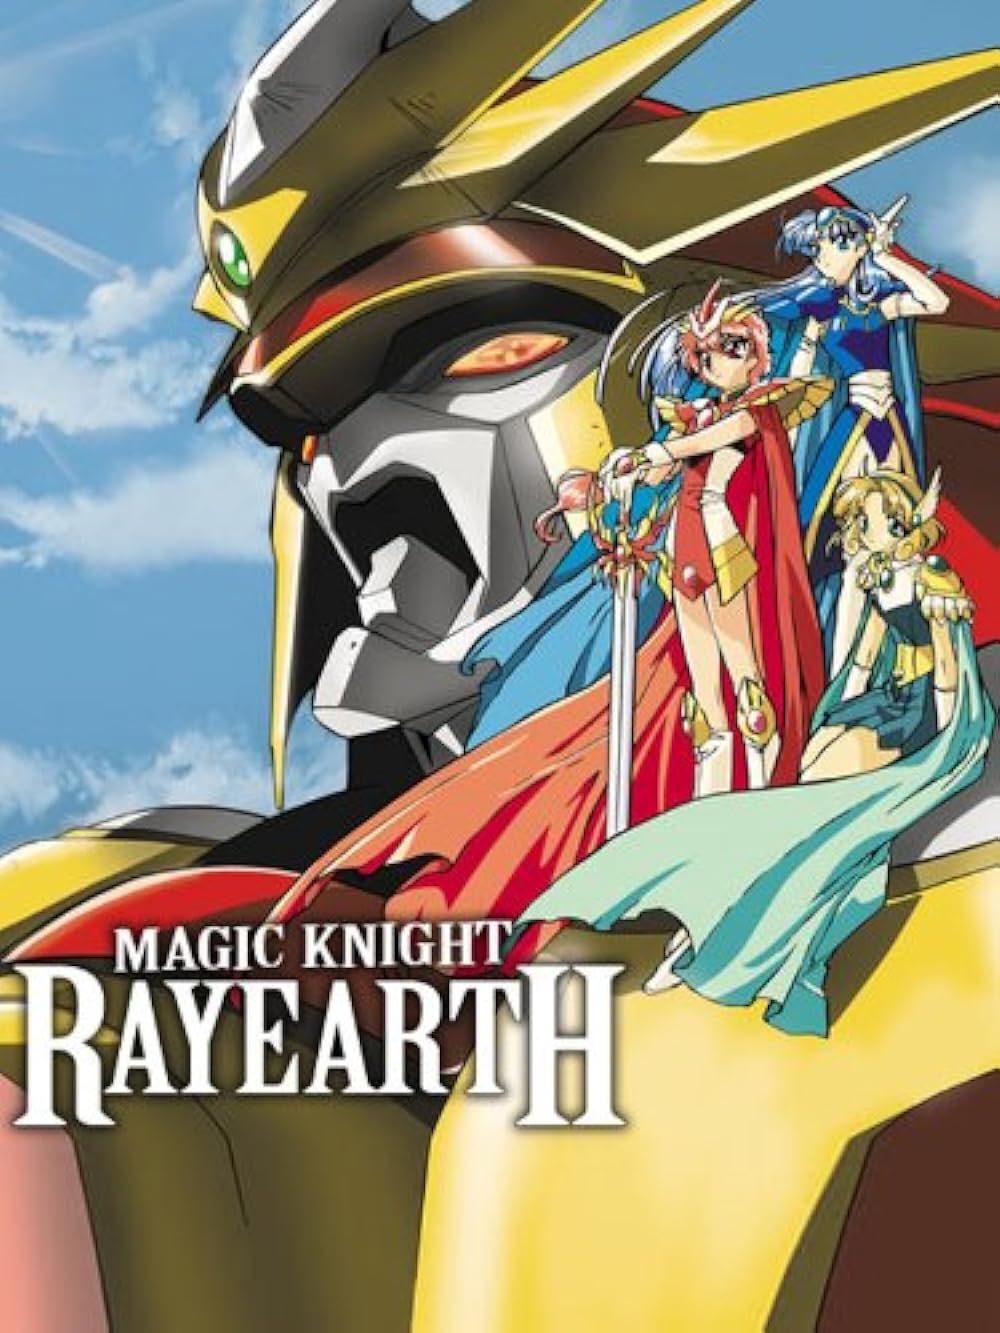 Magic Knight Rayearth cover art, featuring female warriors on the shoulder of a mecha unit